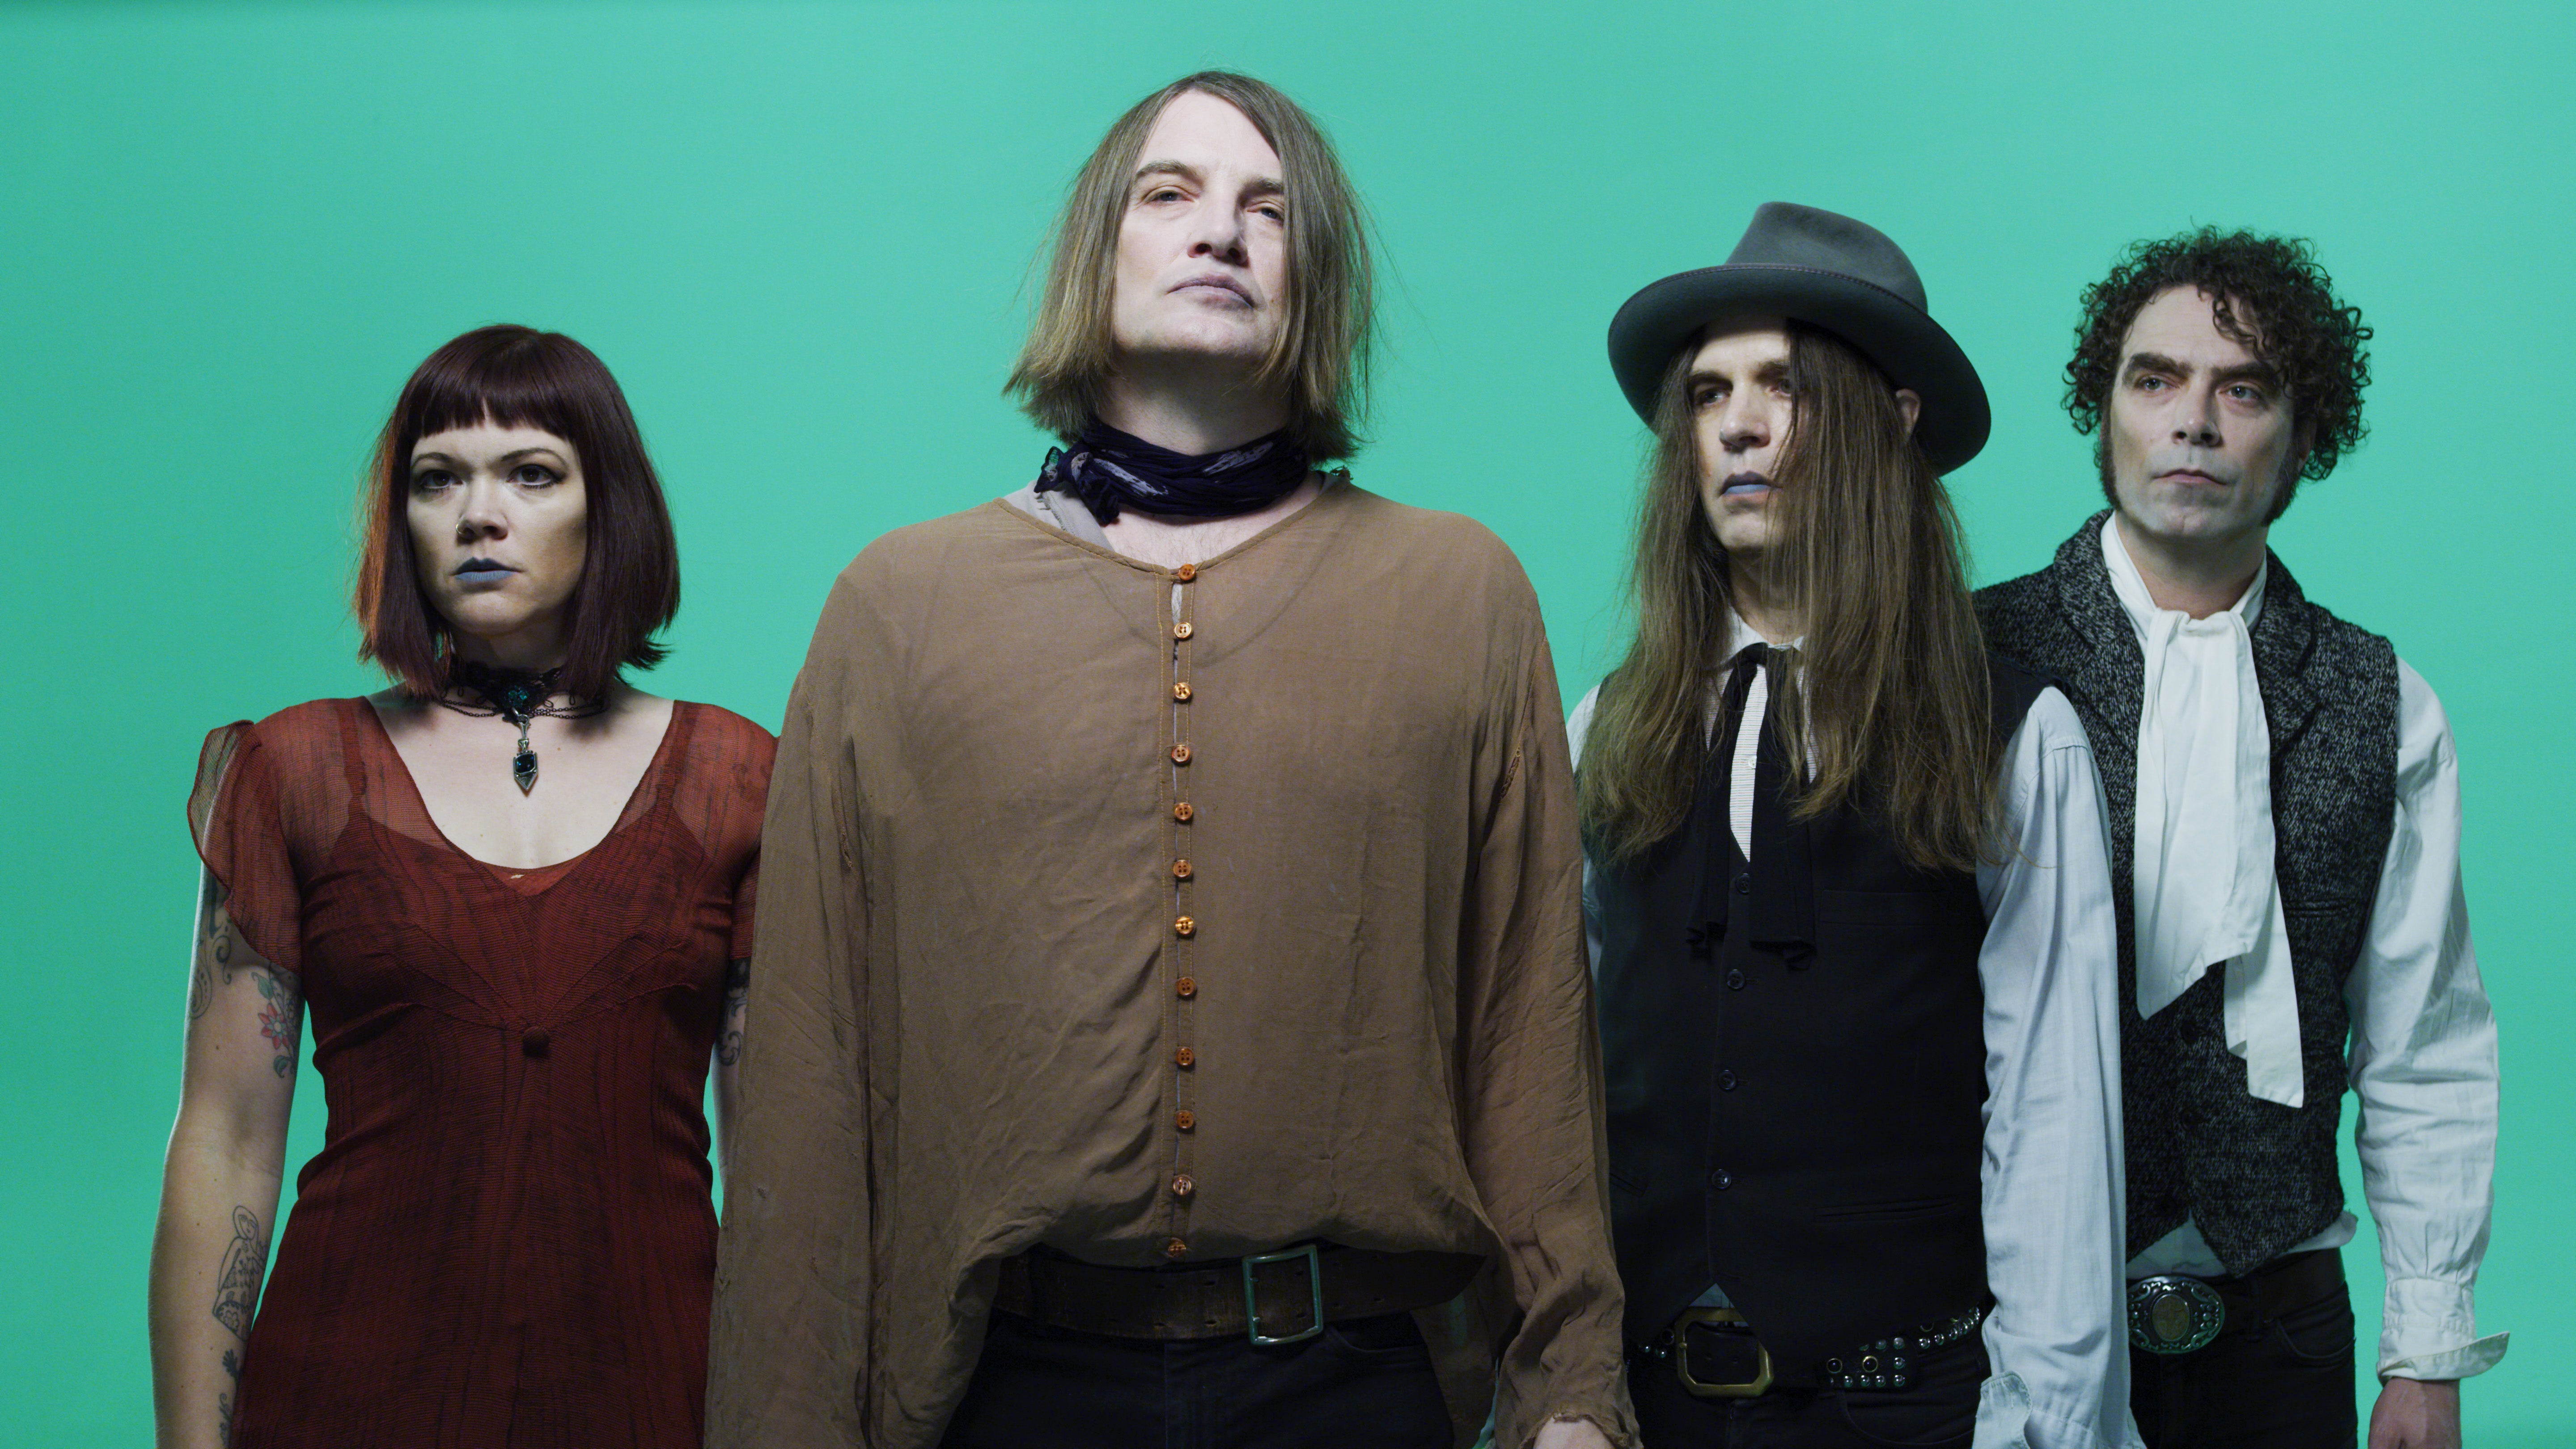 The Dandy Warhols + The Black Angels in Glasgow promo photo for Priority from O2 presale offer code